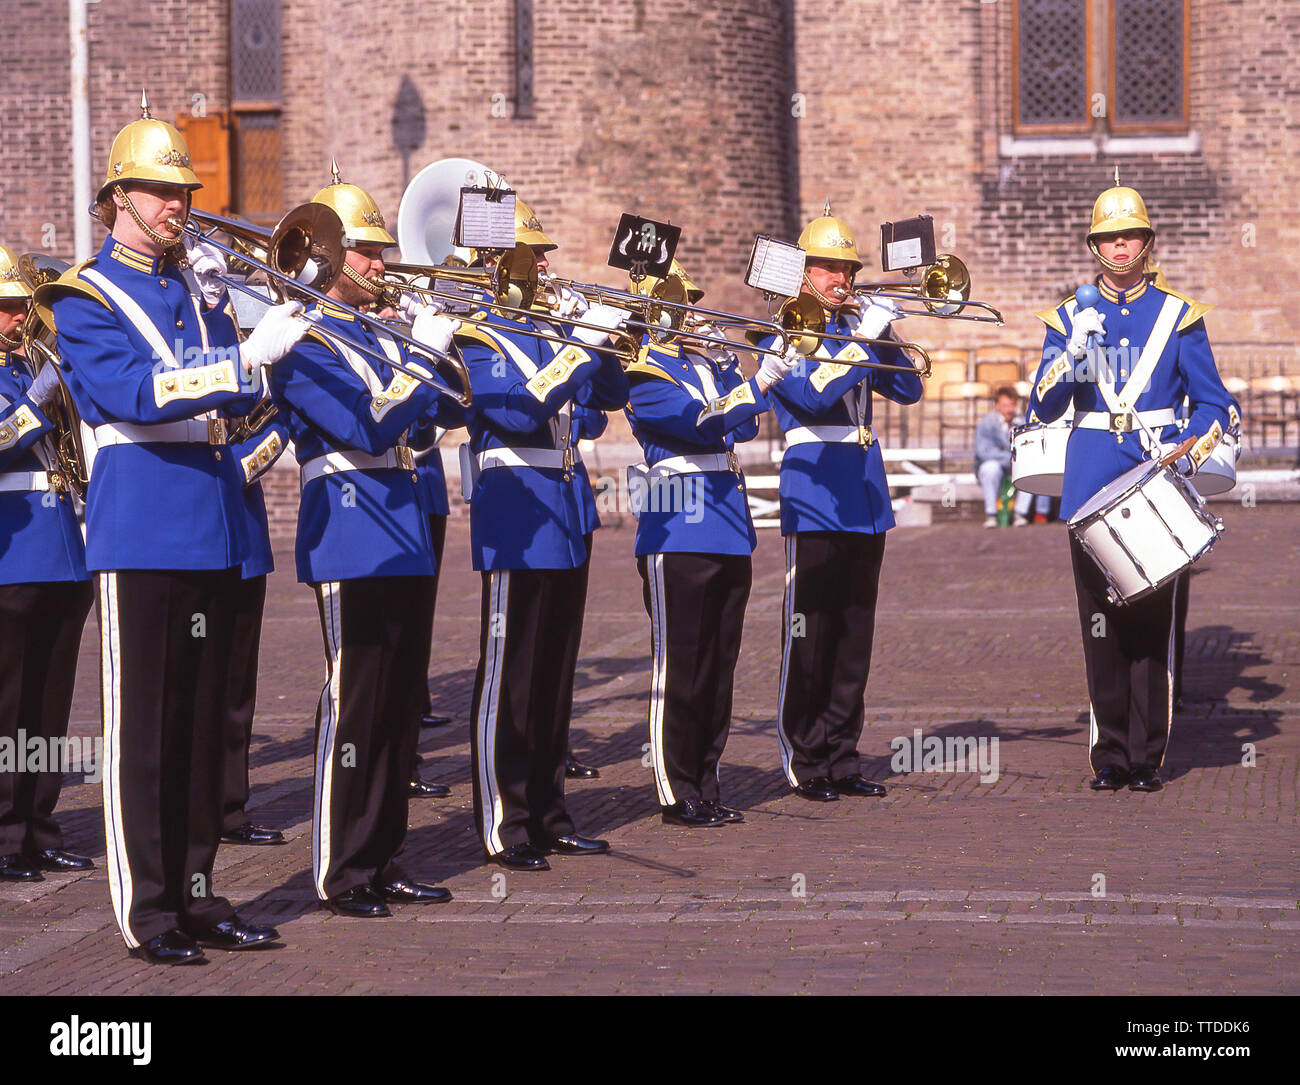 Marching band inside The Inner Court of The Binnenhof, The Hague (Den Haag), Zuid-Holland, Kingdom of the Netherlands Stock Photo